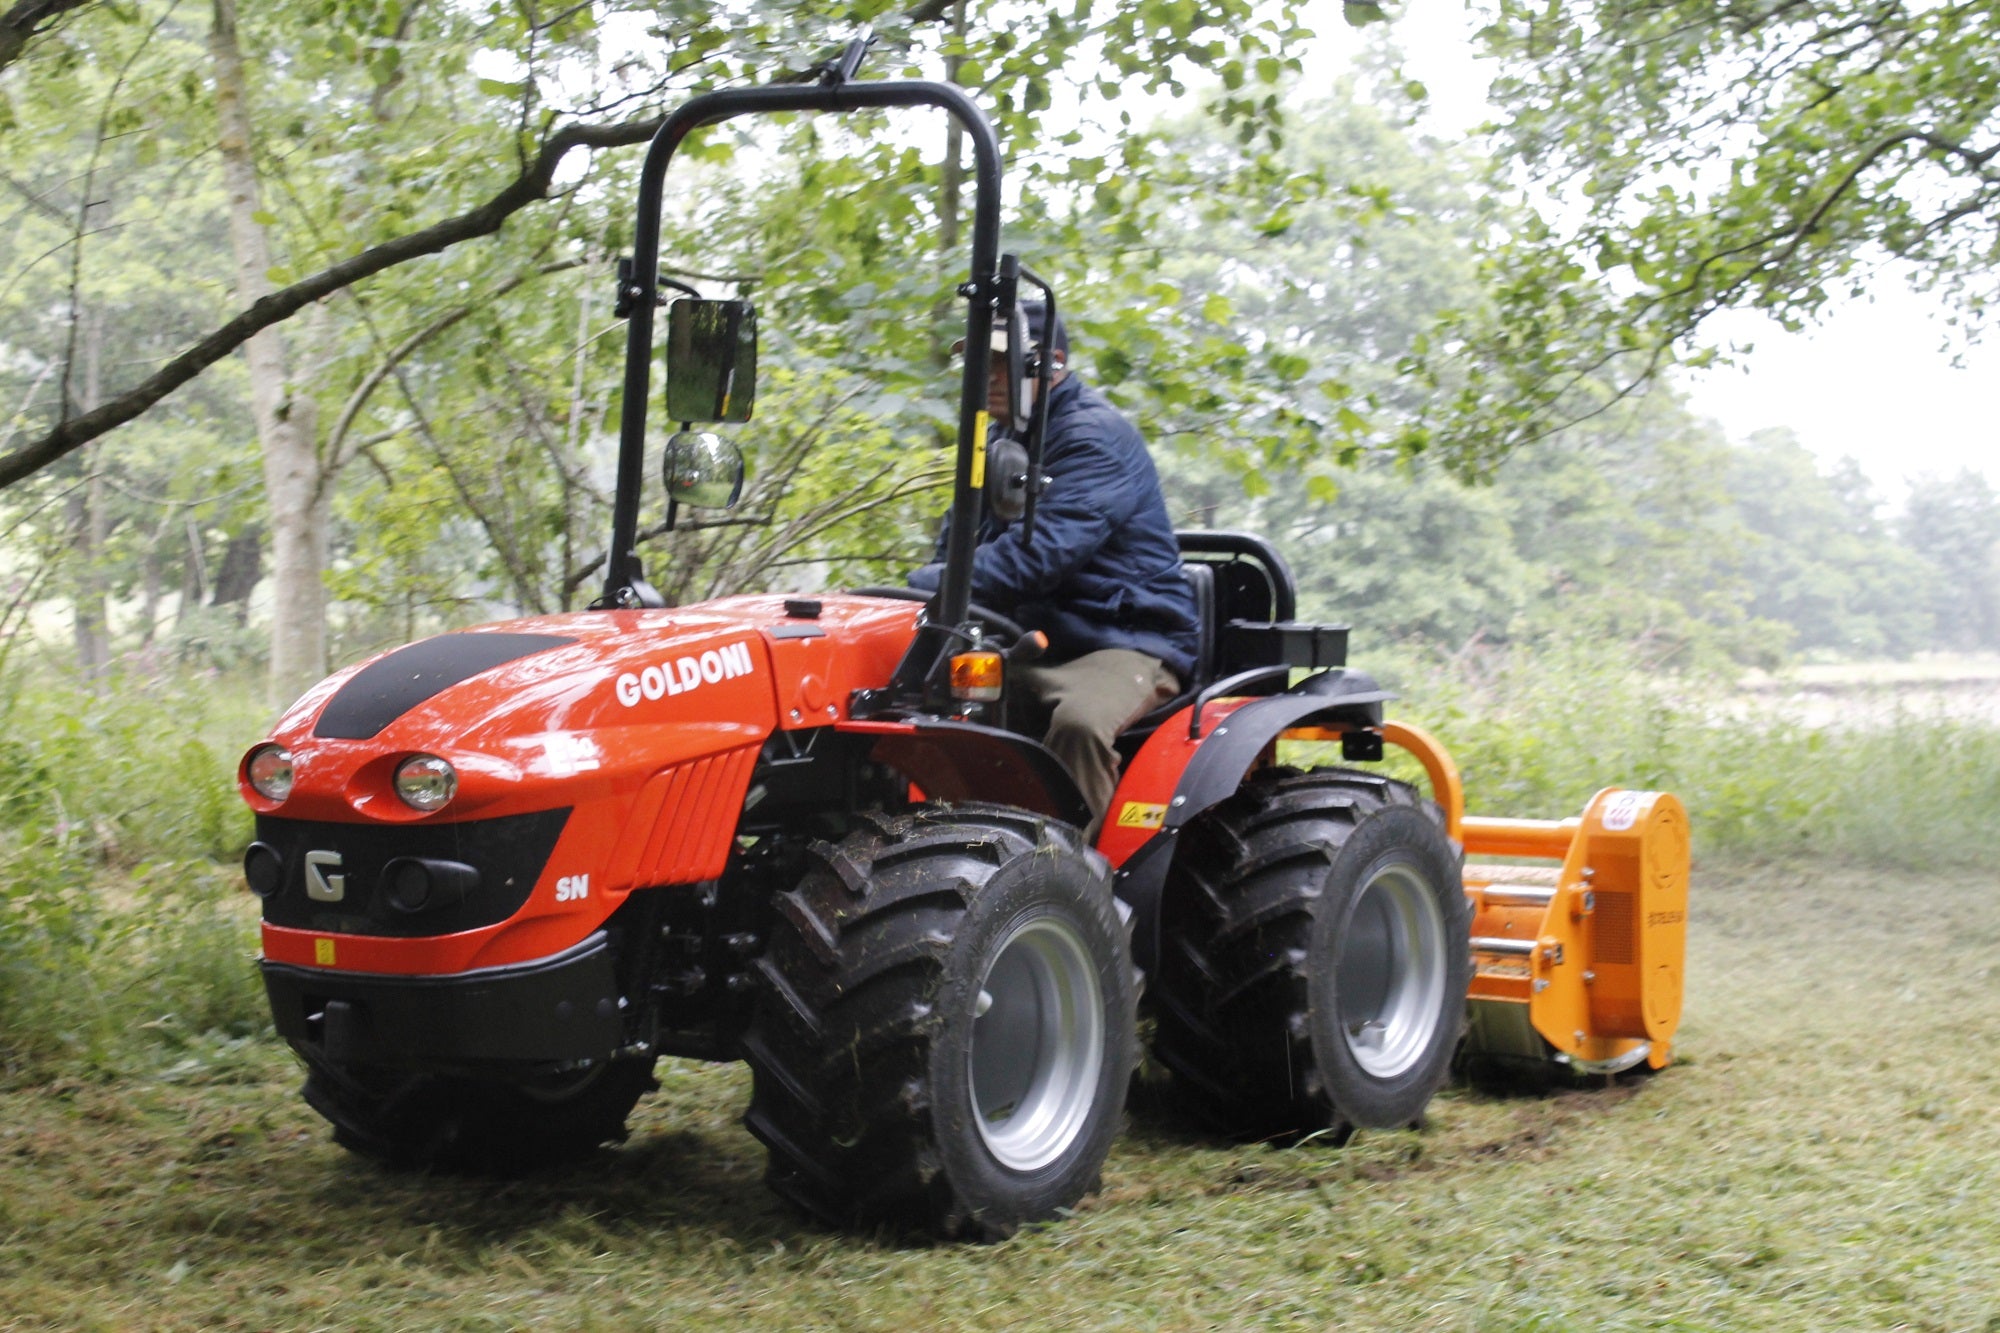 Goldoni Tractors from CTM with Deleks Leopard Flail Mower.  All-terrain Alpine tractor for go-anywhere capability all year round